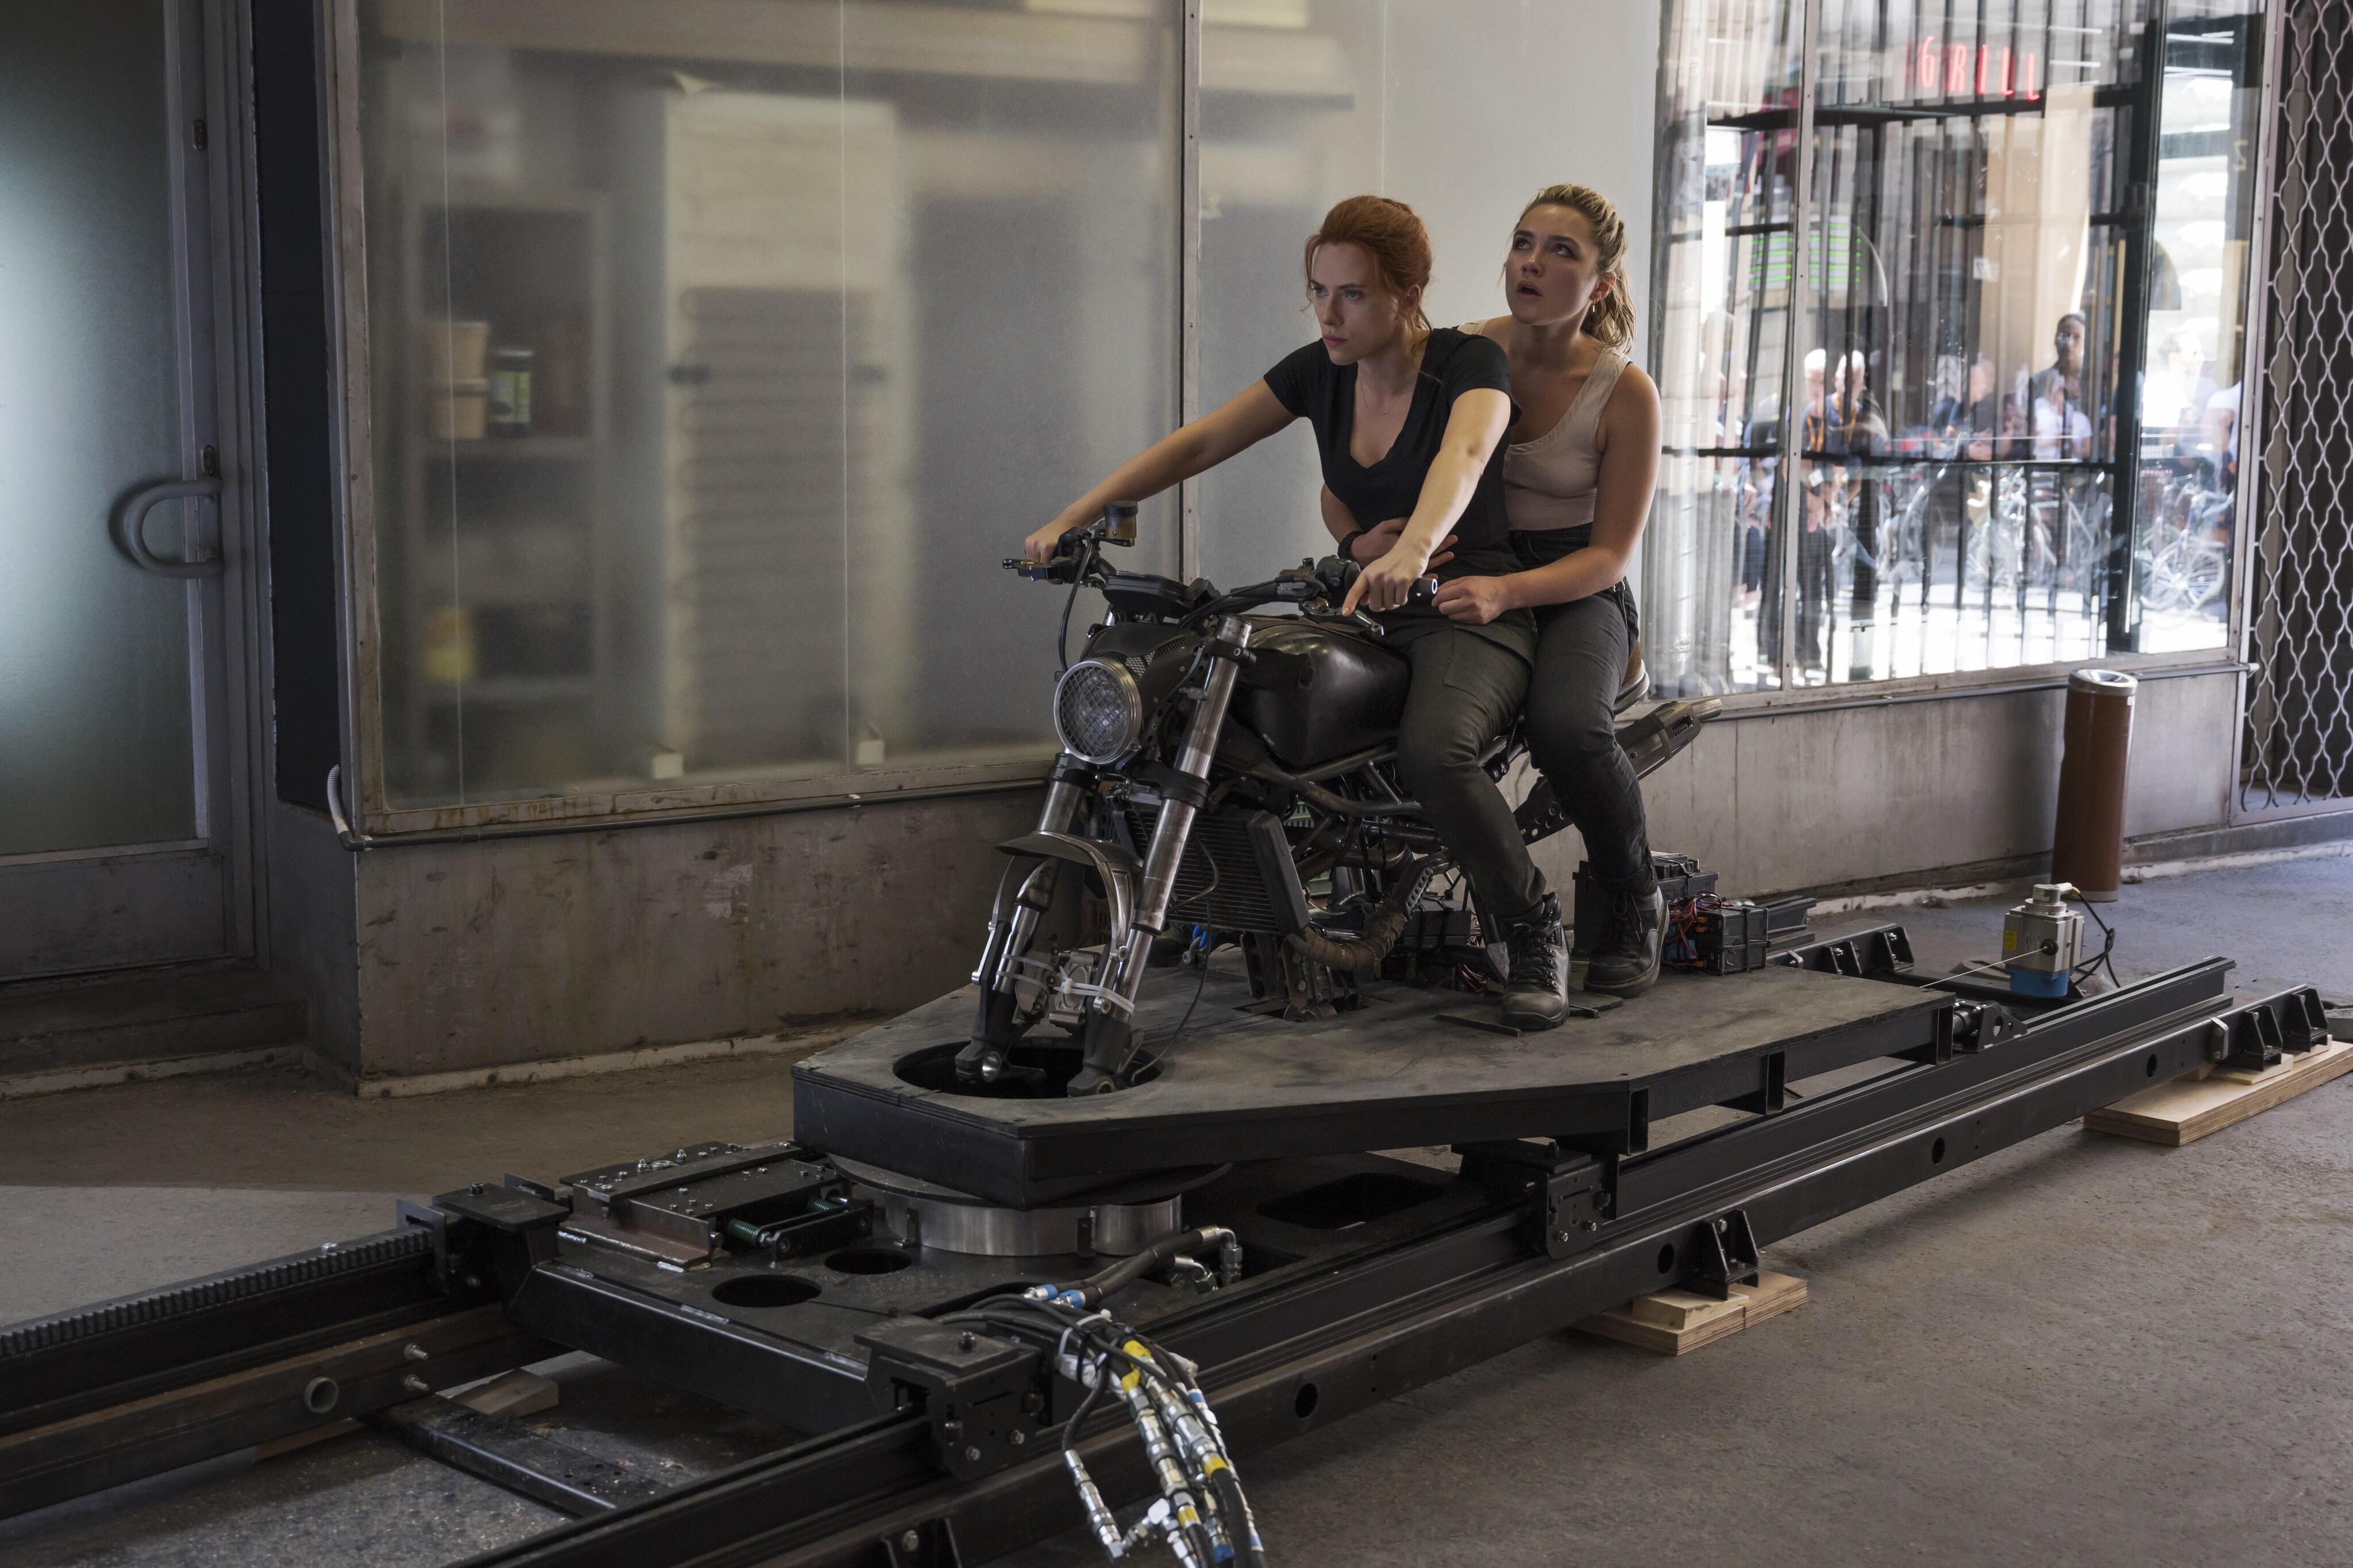 Scarlett Johansson and Florence Pugh Behind-the-Scenes of Black Widow